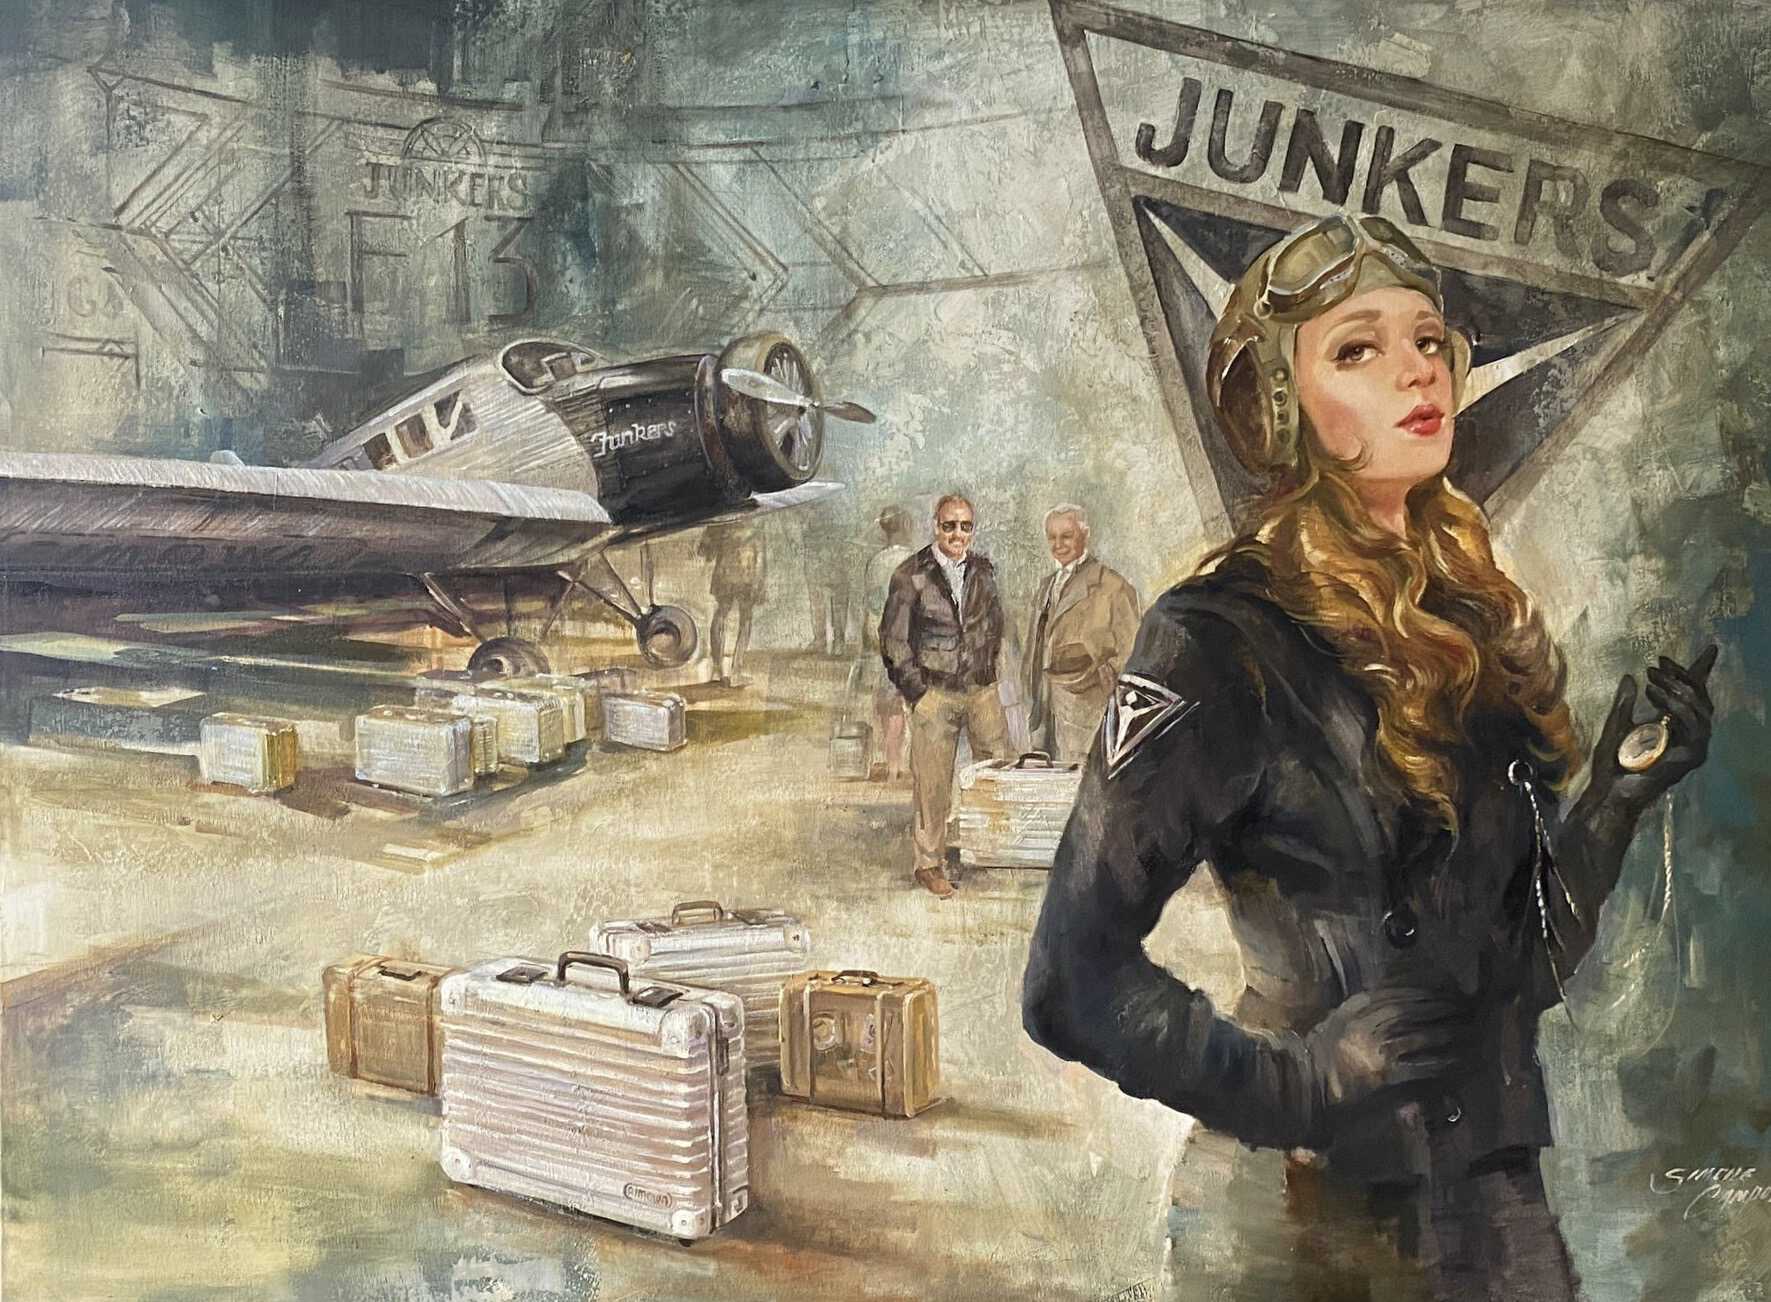 Junkers Story by Dieter Morszeck